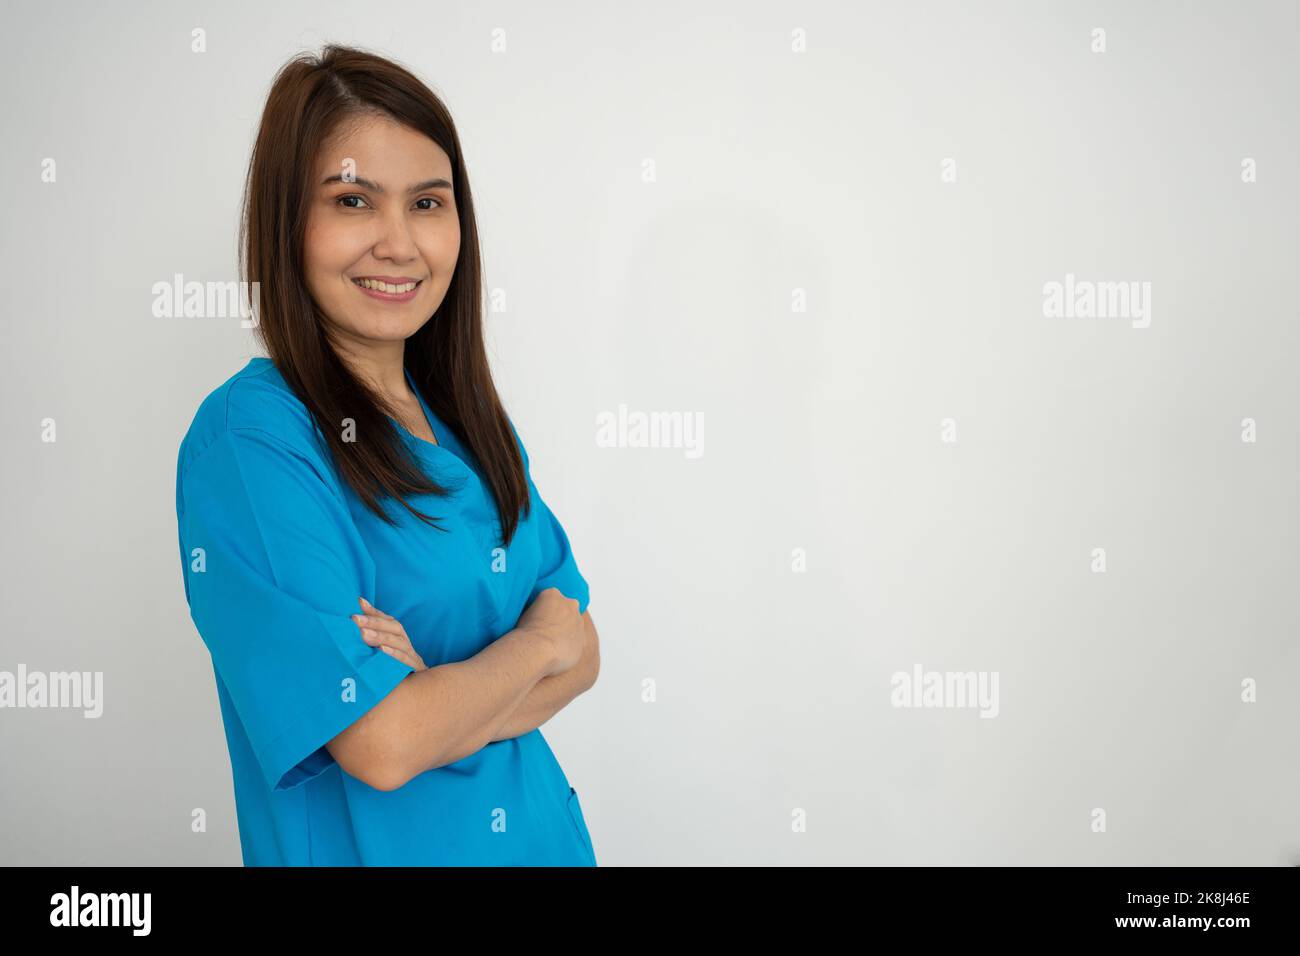 Portrait Of confident, happy, and smiling Asian medical woman doctor or nurse wearing blue scrubs uniform over isolated white background Stock Photo